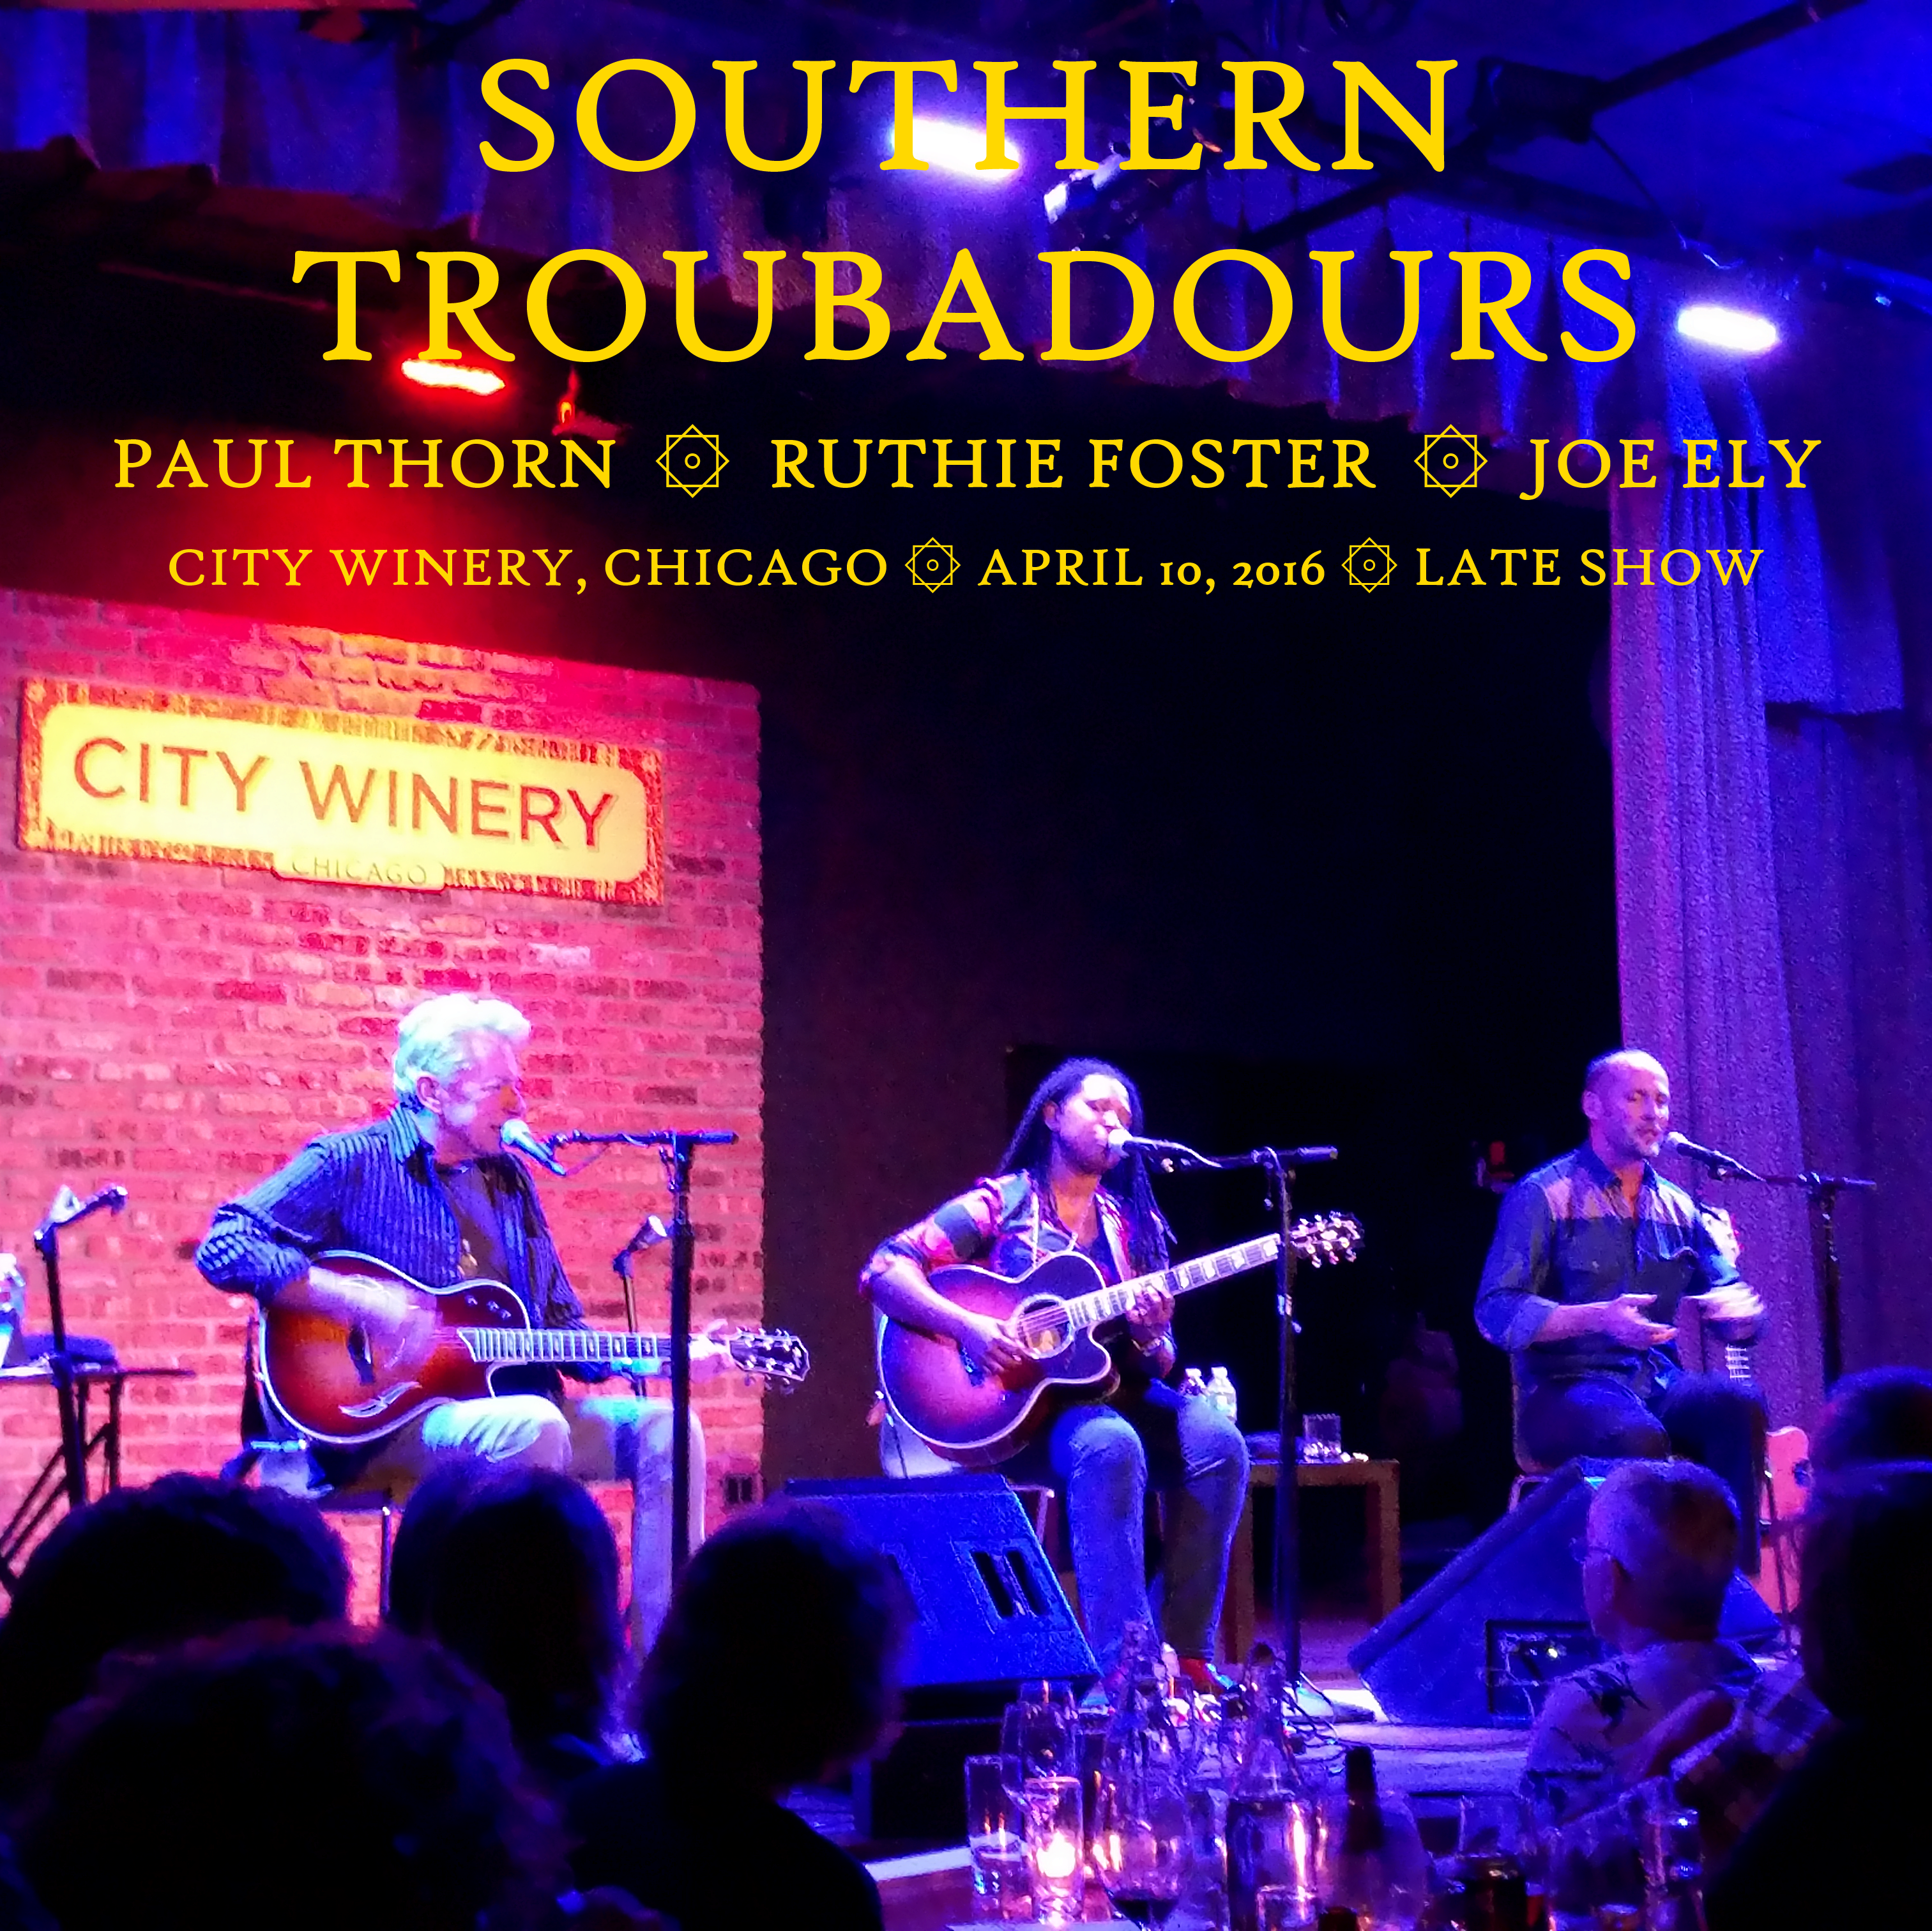 SouthernTroubadours2016-04-10CityWineryChicagoIL (1).png